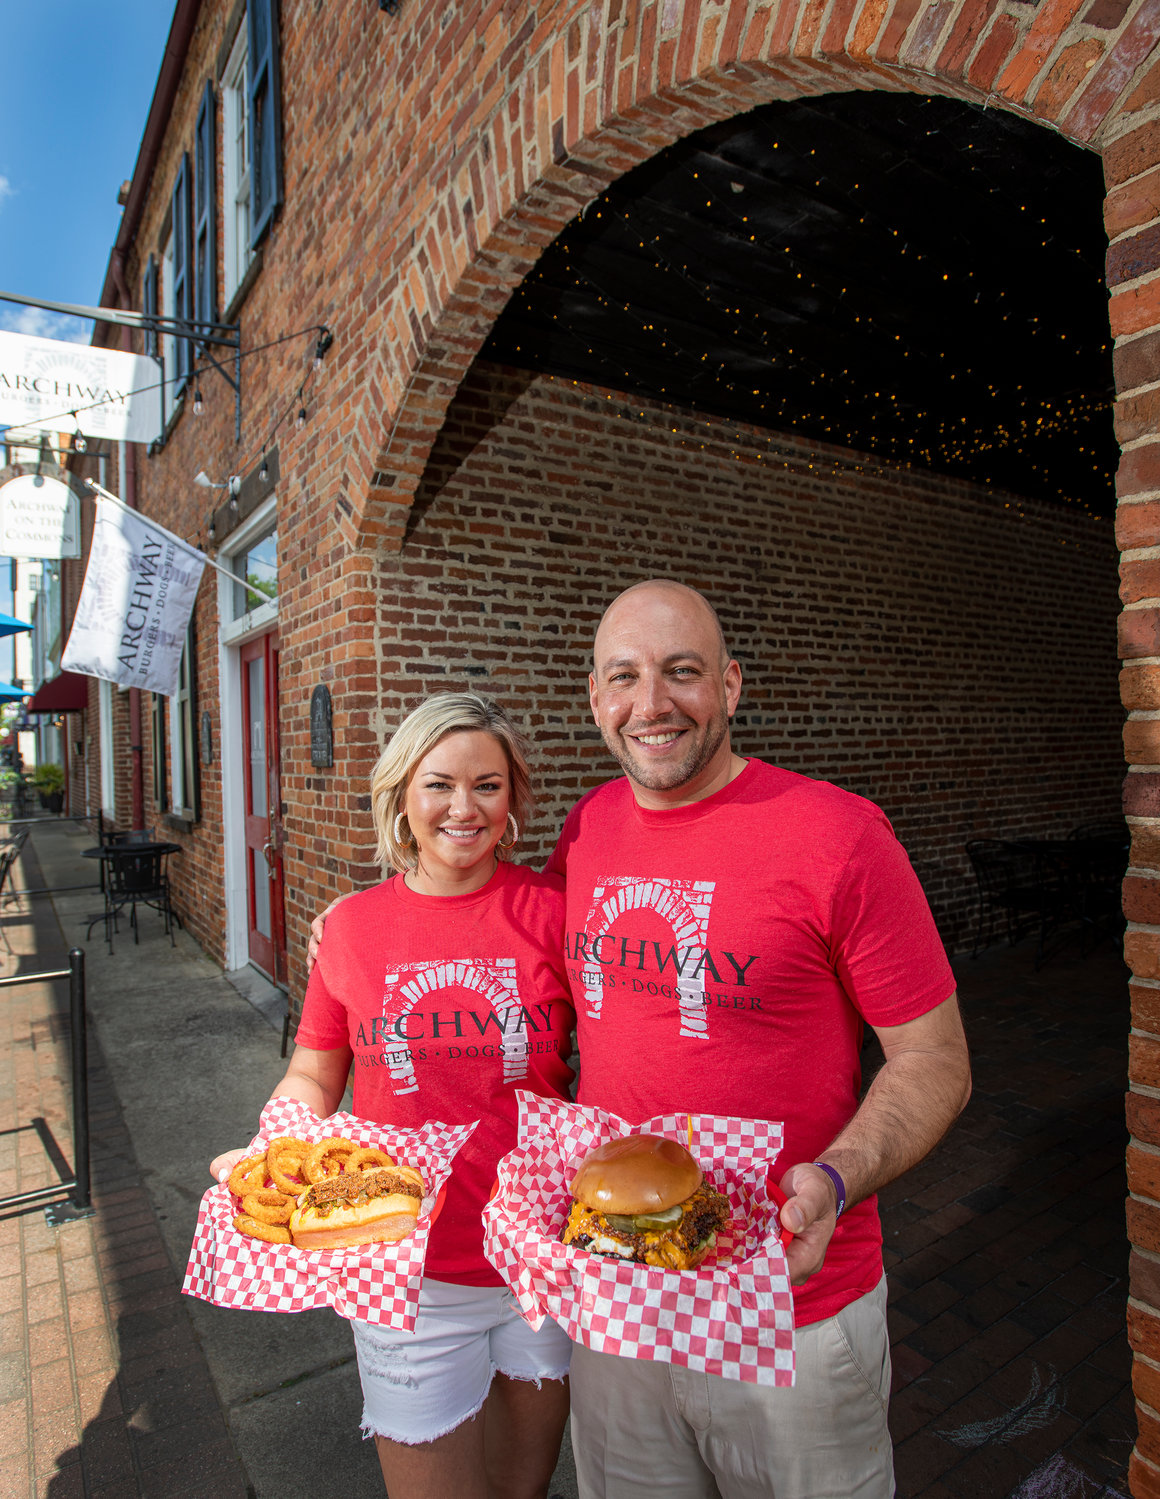 Courtney and Peter ‘P.J.’ Zahran opened Archway Burgers, Dogs and Beer in 2019. The menu includes customized burgers, burger bowls, all-beef hot dogs, beer-battered fries and beer onions sauteed in brown ale.